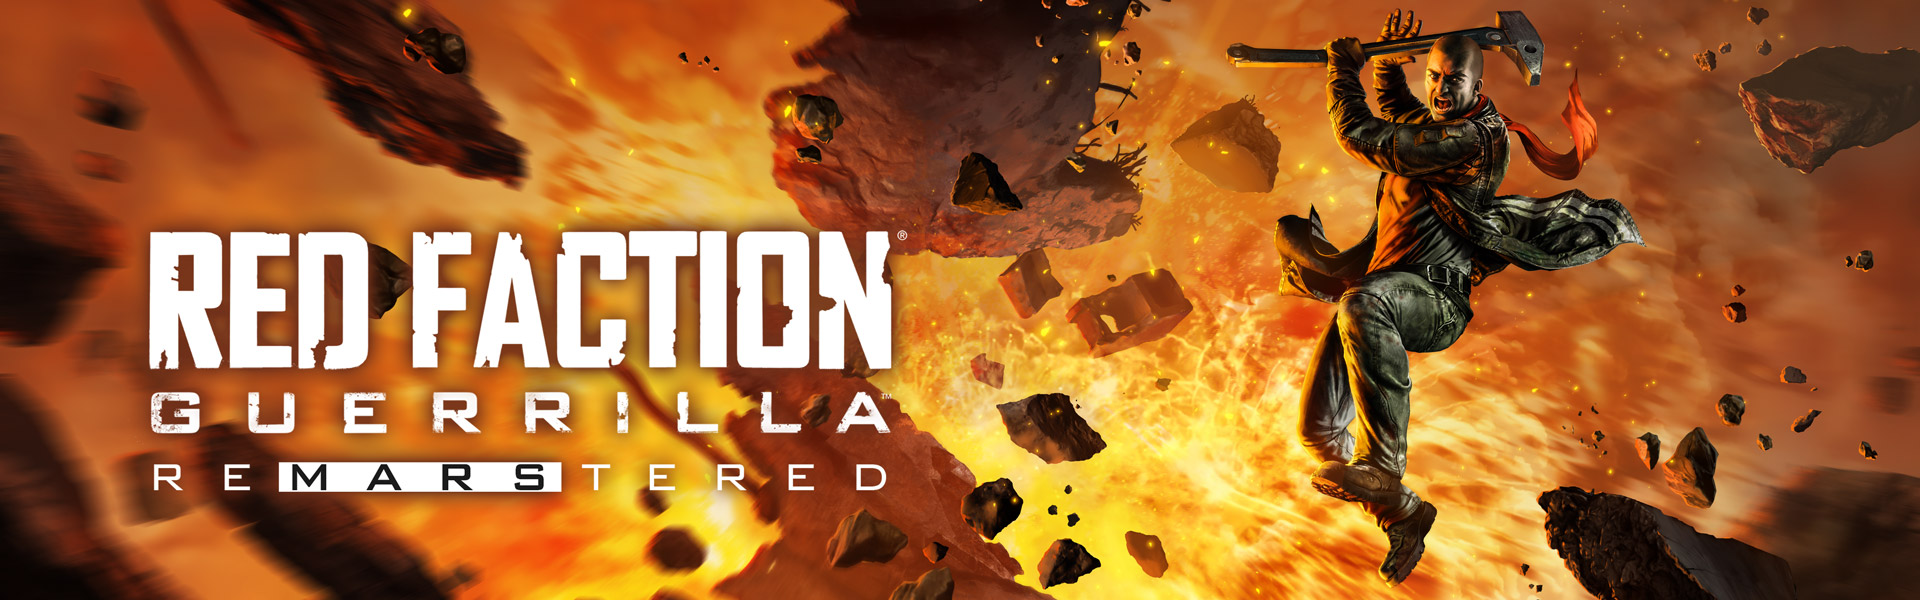 Red Faction: Guerrilla: Re-Mars-tered review: A fun but flawed trip down memory lane